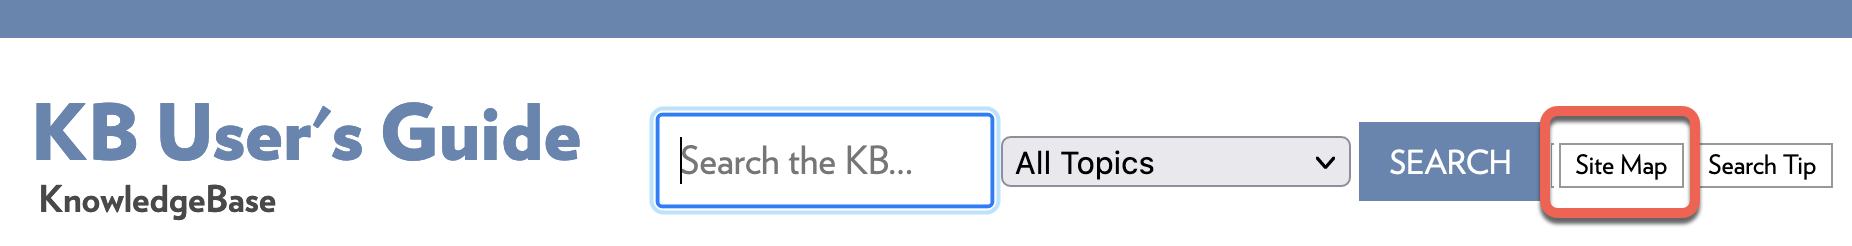 Kb live site search options highlighting the site map button